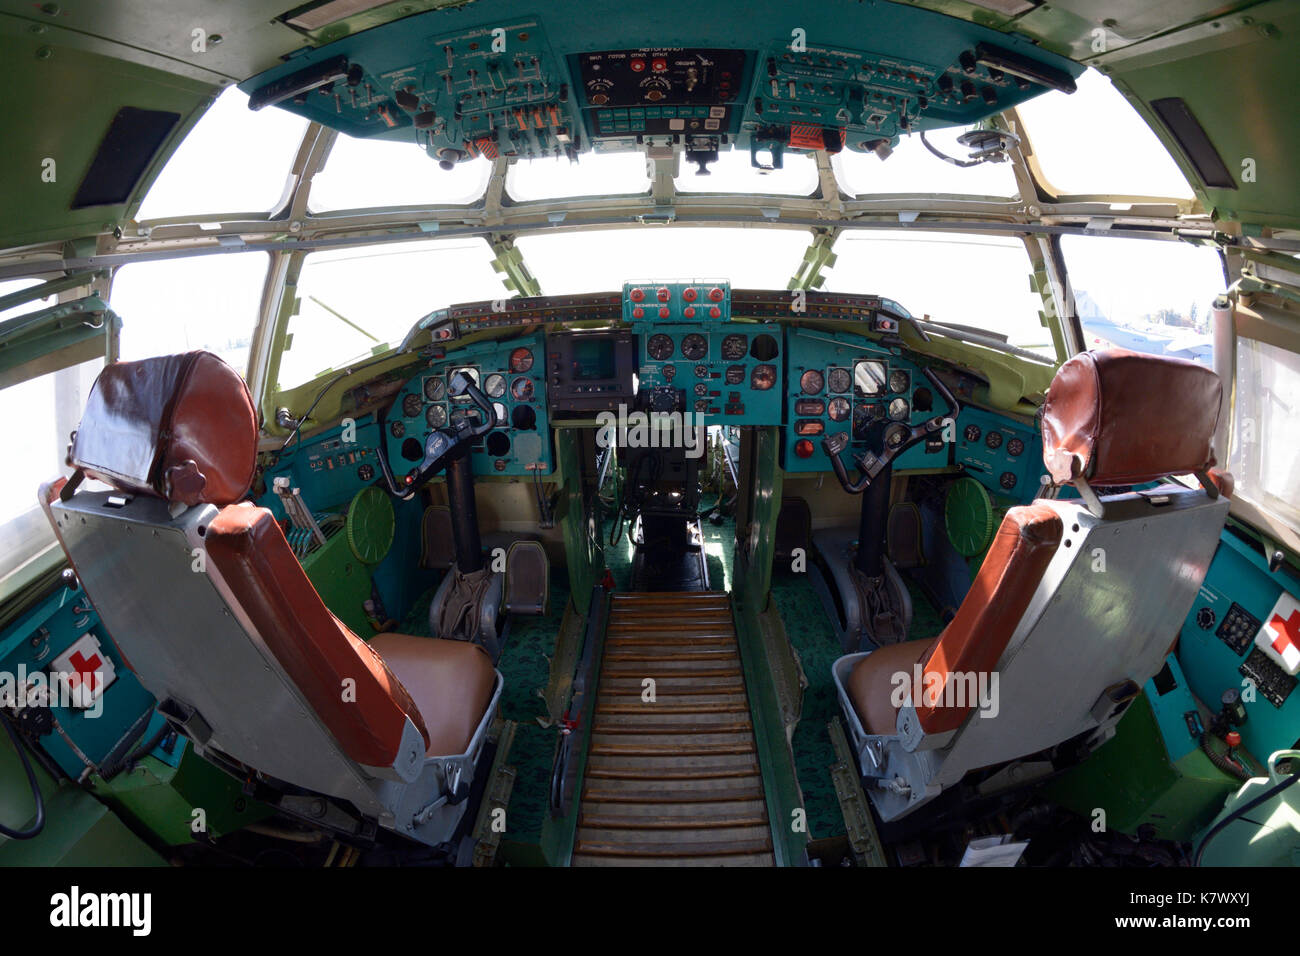 The cockpit of an aircraft. Air show at Zhuljany airport. September 16, 2016. Kyiv, Ukraine. Stock Photo